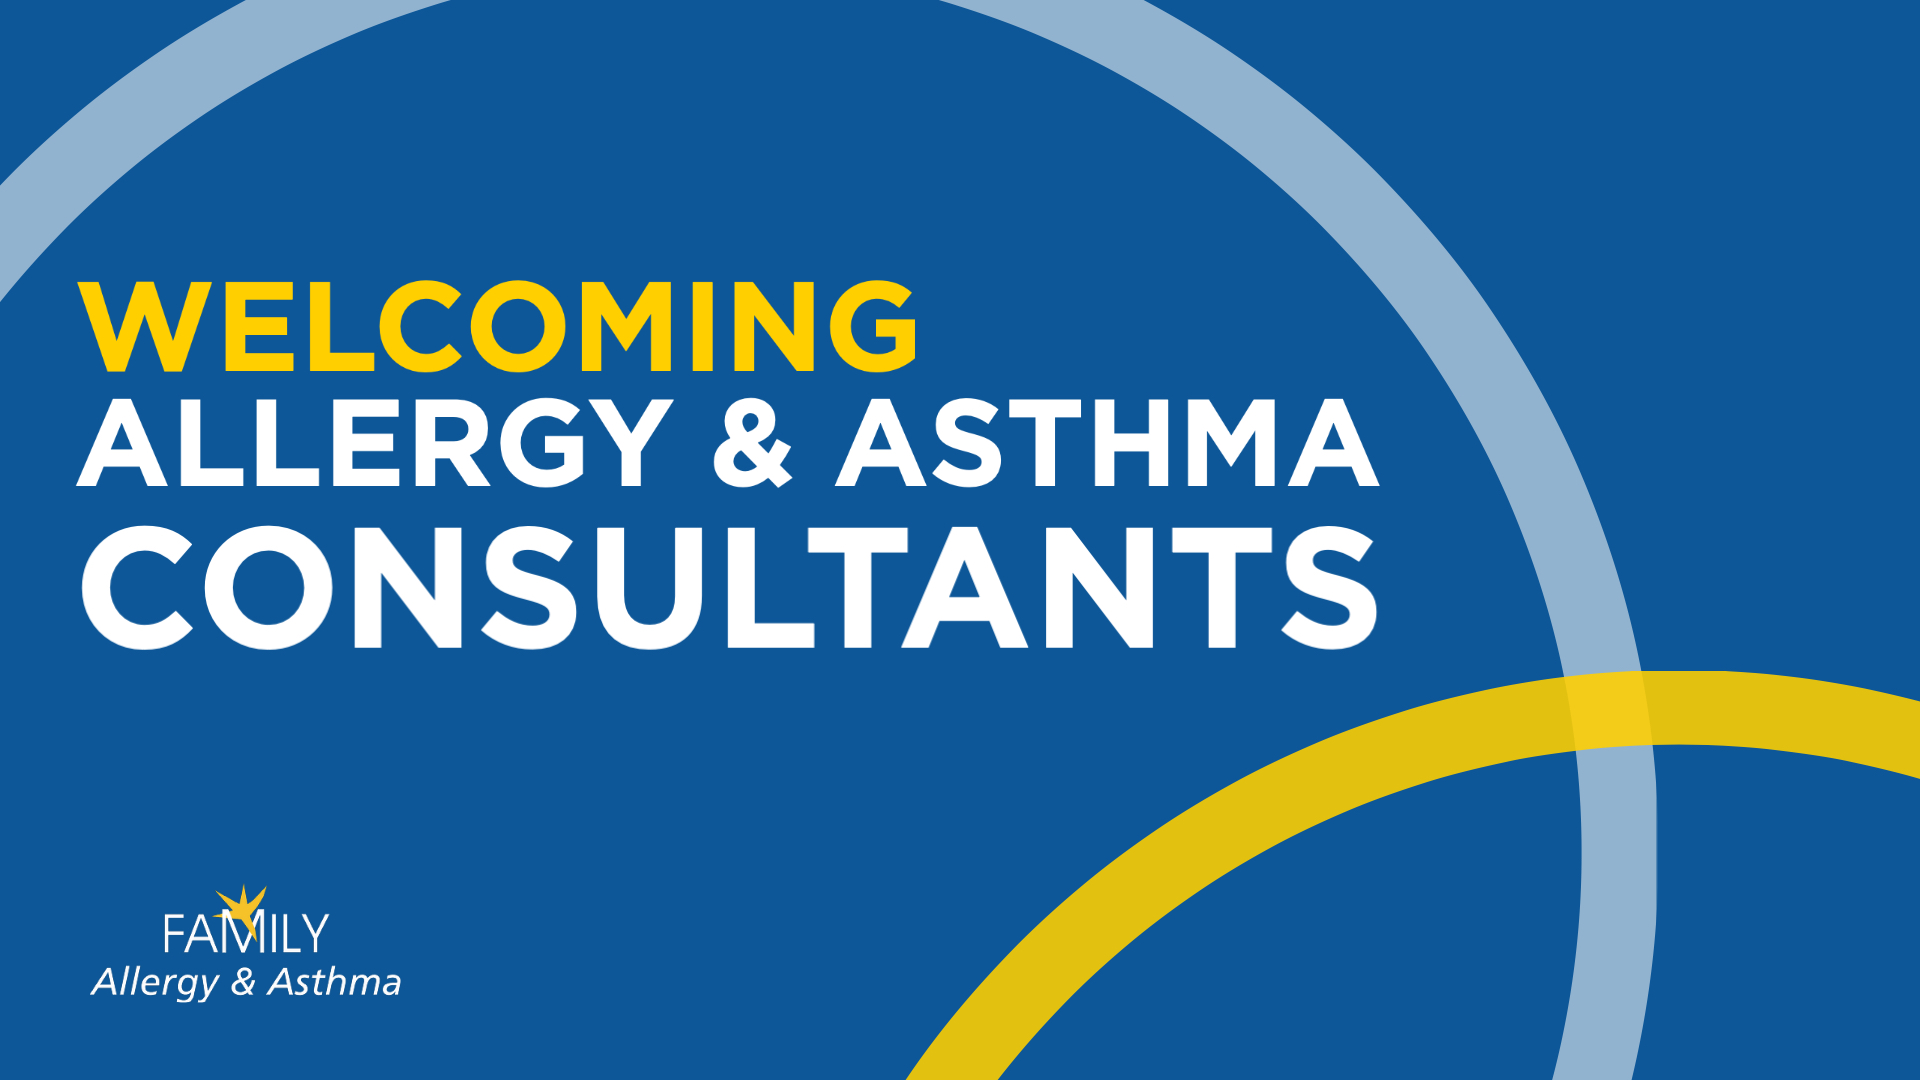 welcoming allergy & asthma consultants